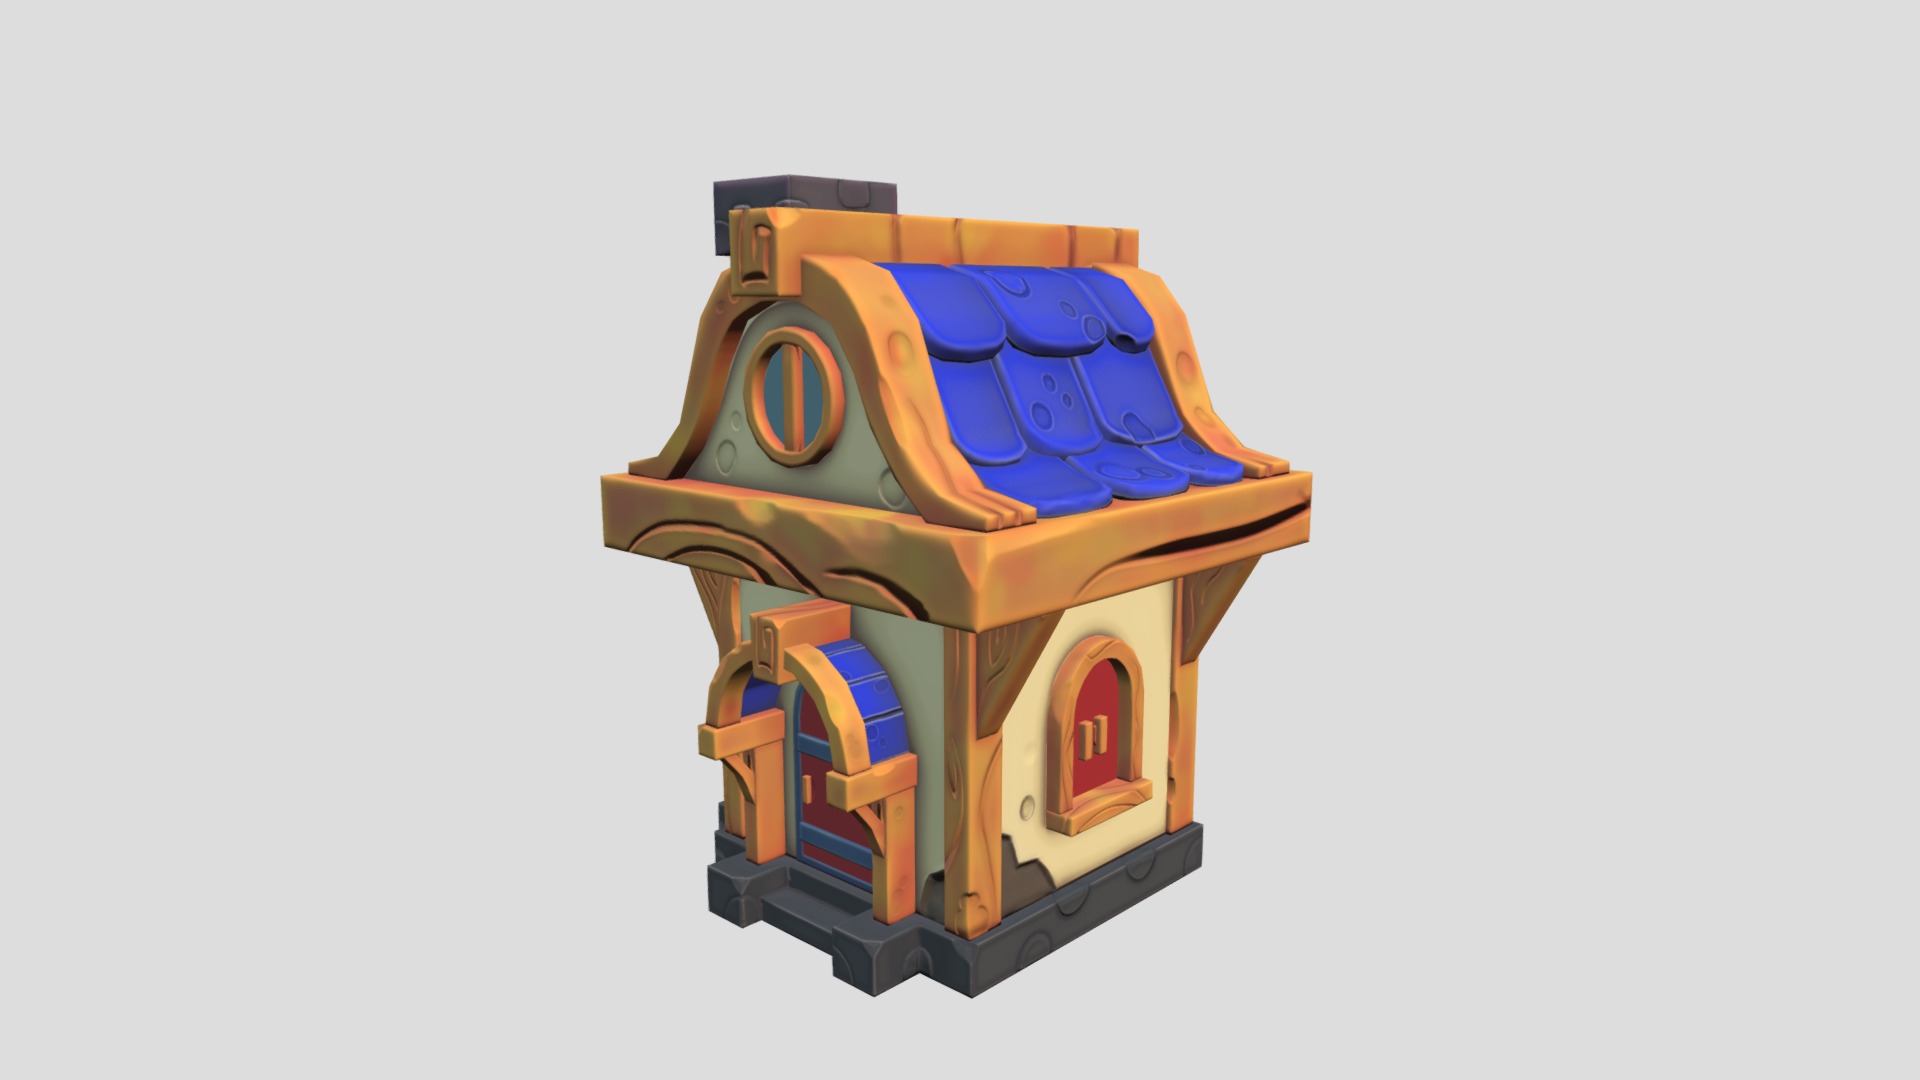 3D model Fantasy House - This is a 3D model of the Fantasy House. The 3D model is about a toy train with a blue and yellow design.